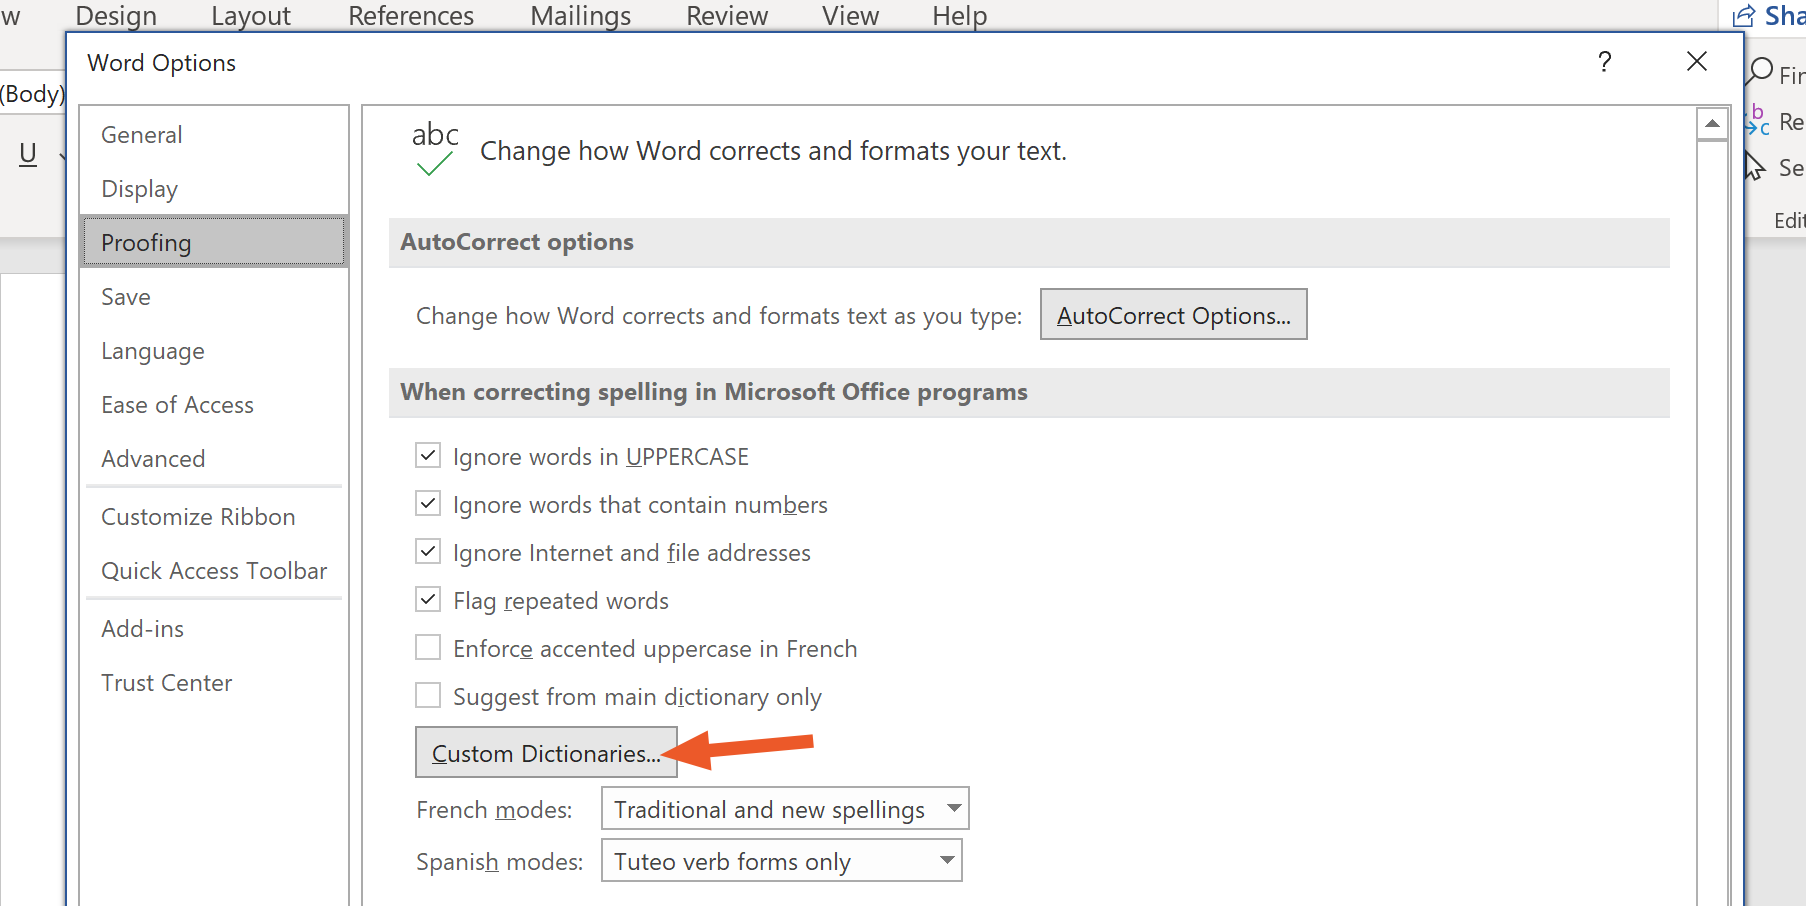 the custom dictionary in word allows you to add your own